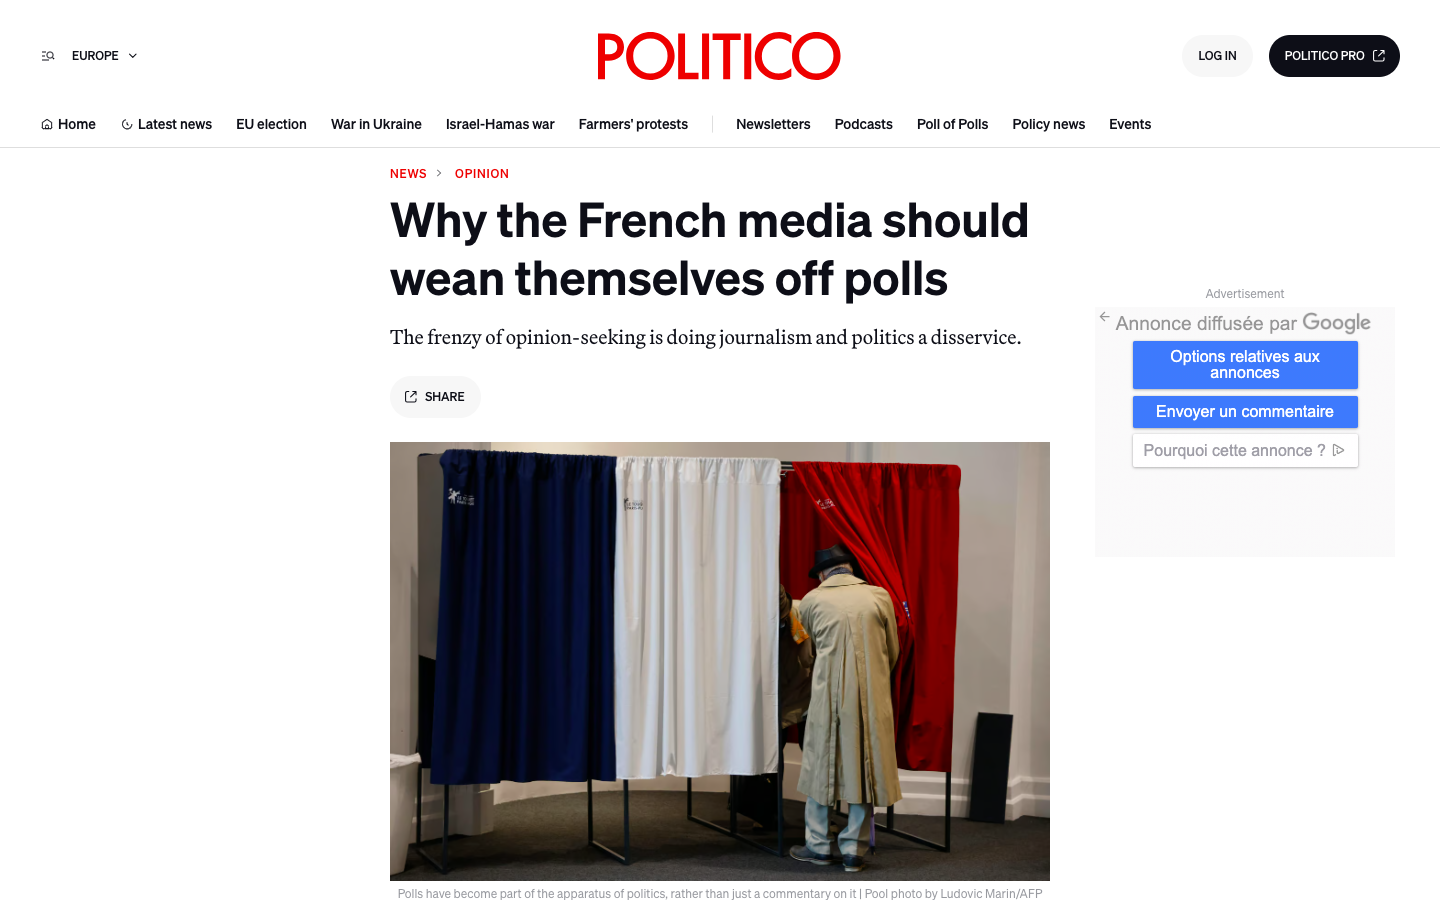 Politico - Why the French media should wean themselves off polls